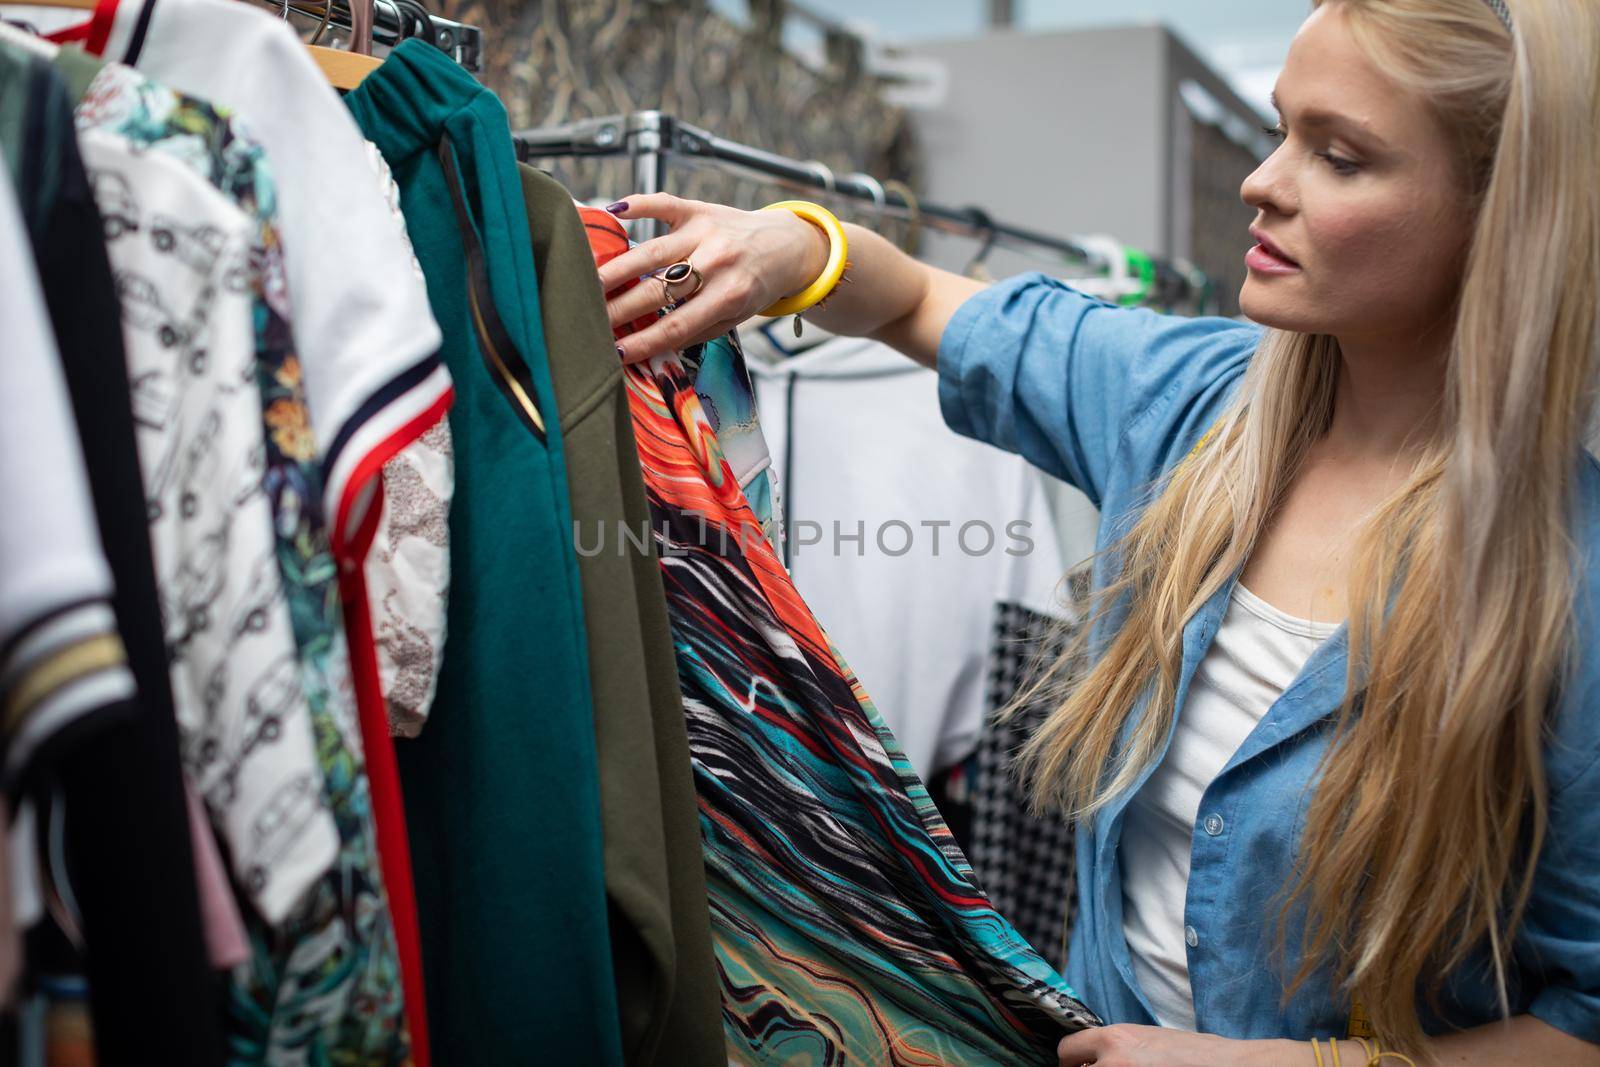 The girl browses through various clothes hanging on hangers. by fotodrobik